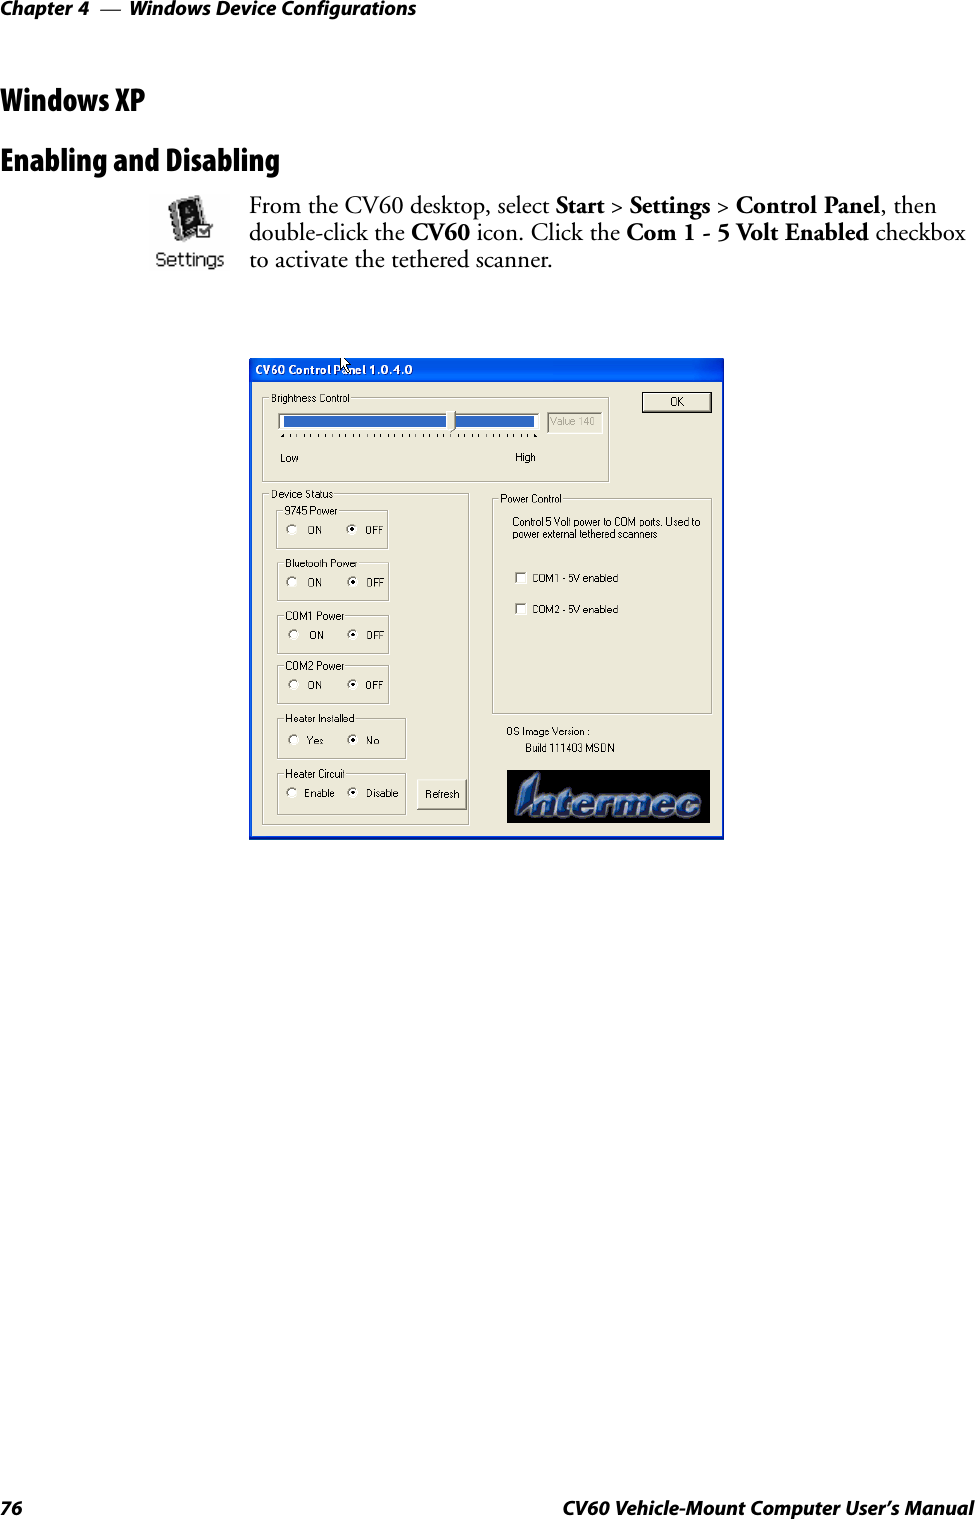 Windows Device ConfigurationsChapter  —476 CV60 Vehicle-Mount Computer User&apos;s ManualWindows XPEnabling and DisablingFrom the CV60 desktop, select Start &gt; Settings &gt; Control Panel, thendoubleĆclick the CV60 icon. Click the Com 1 Ć 5 Volt Enabled checkboxto activate the tethered scanner.